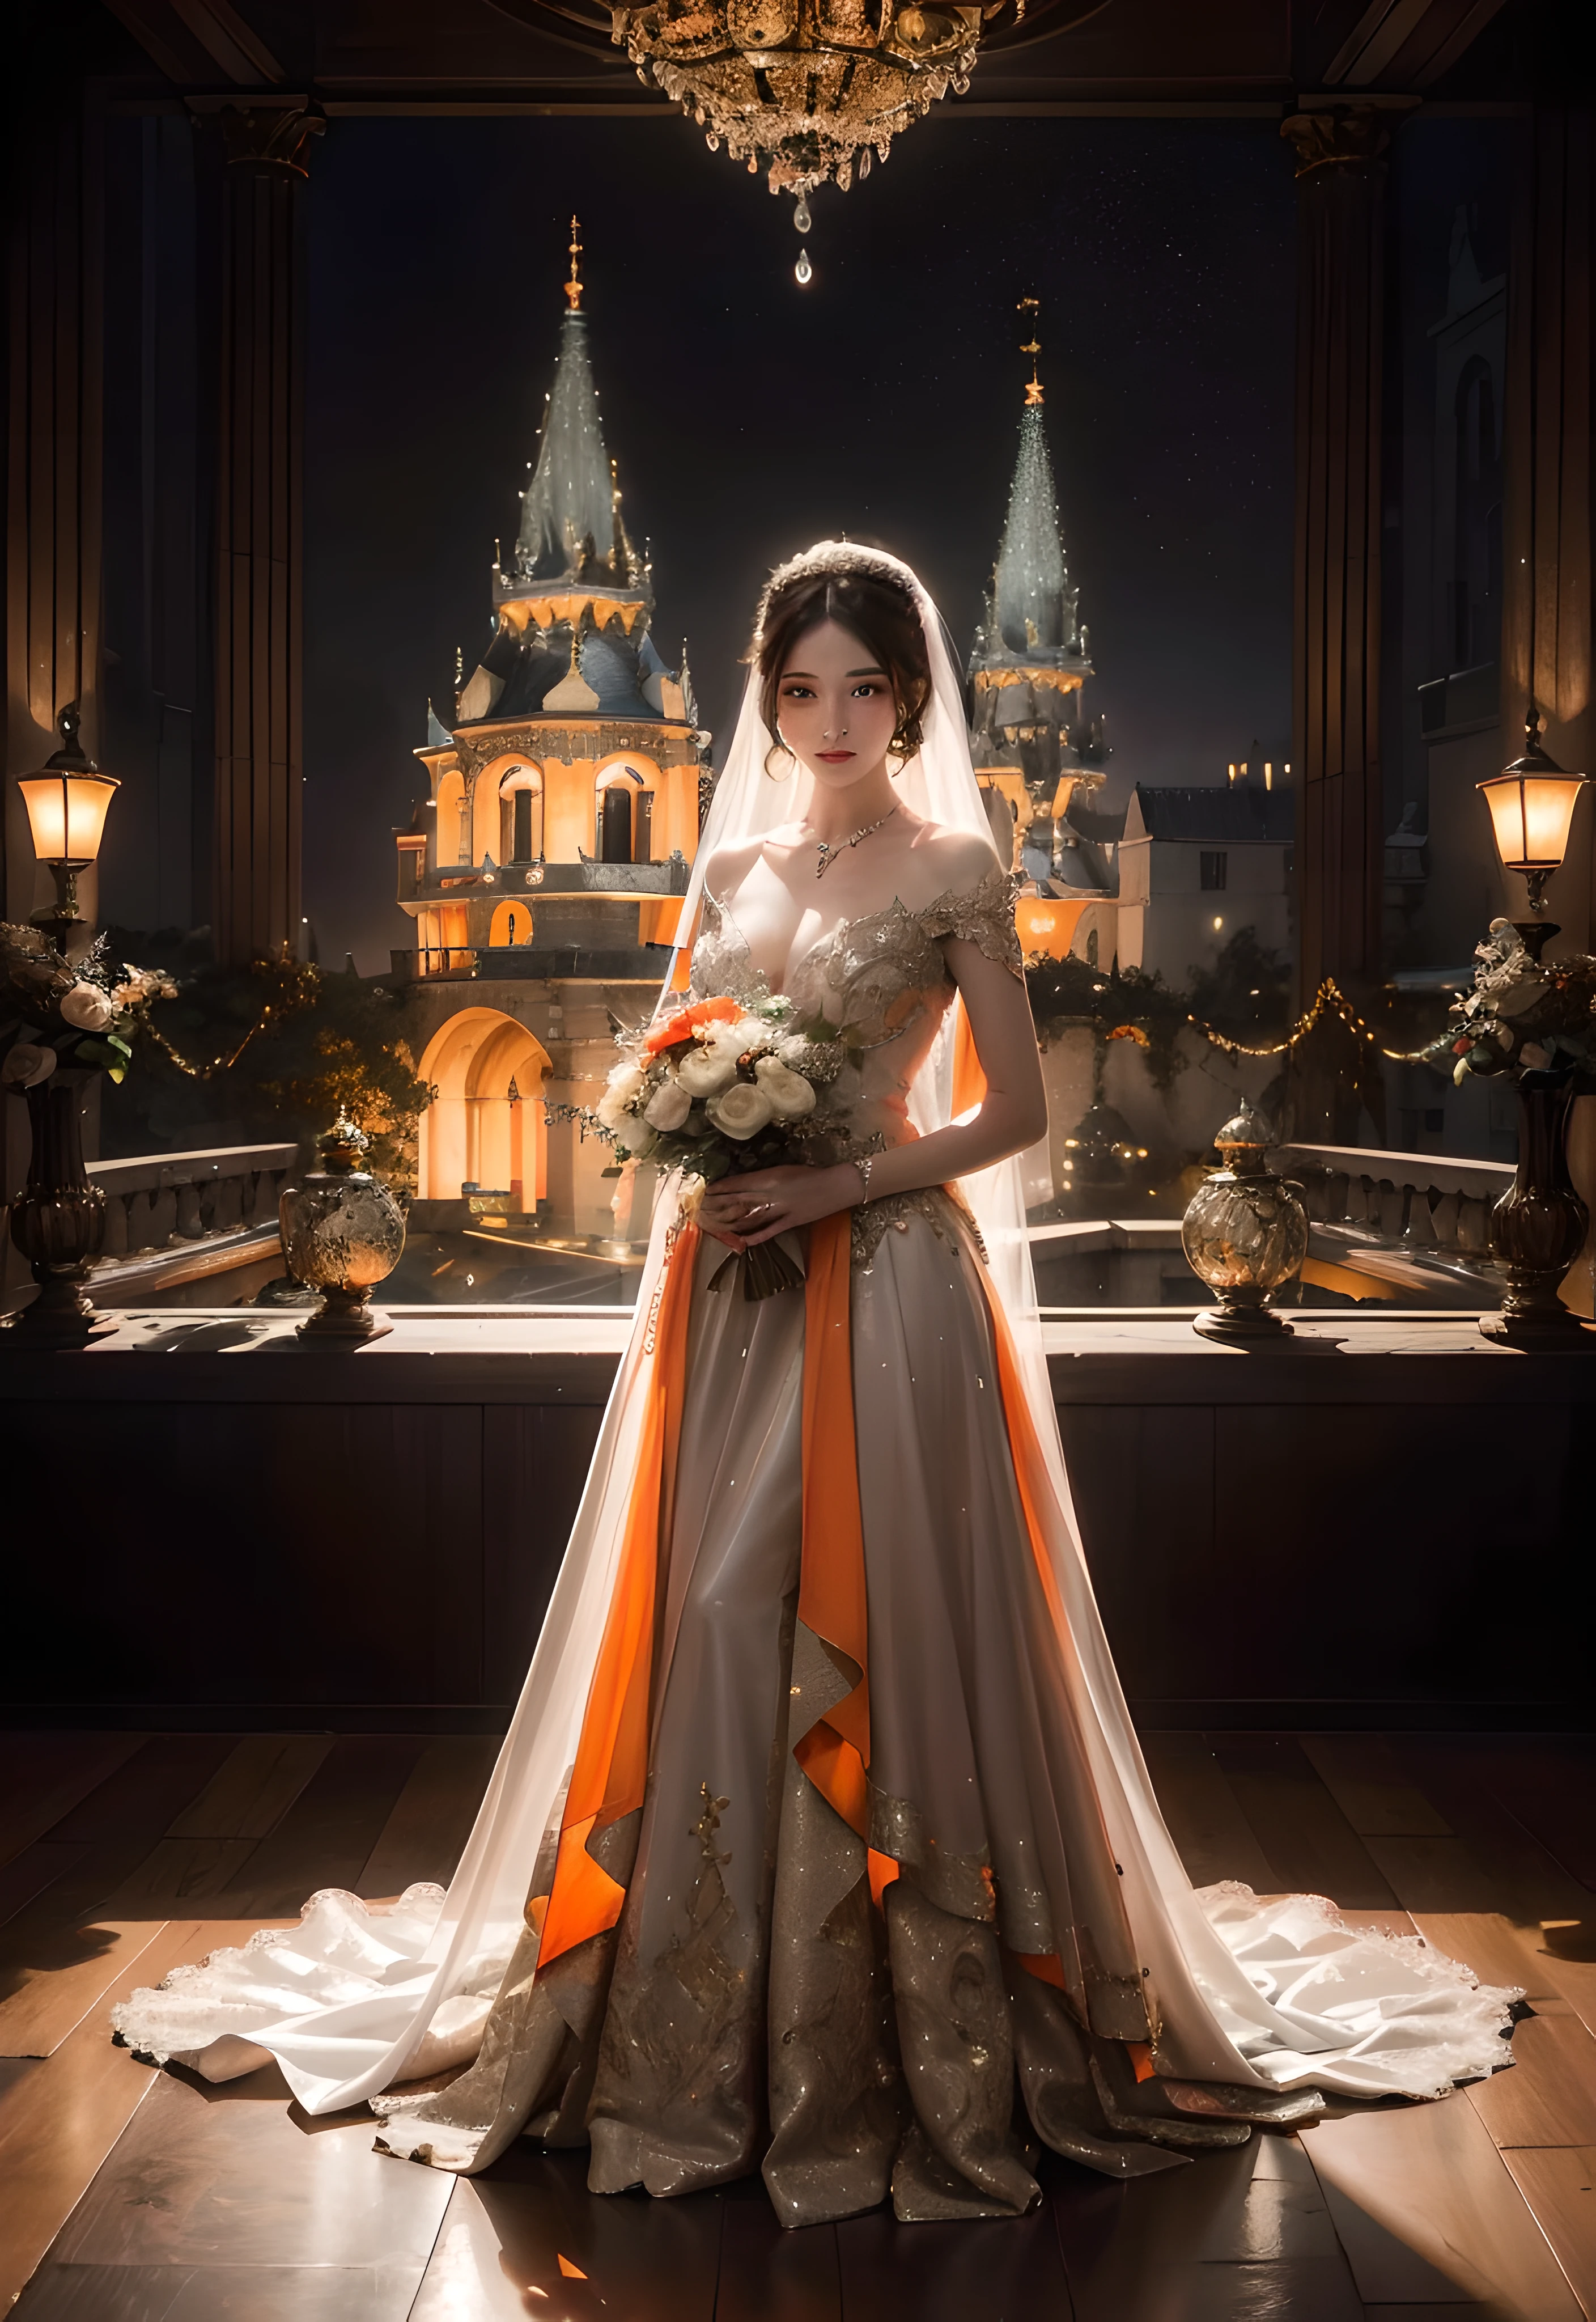 The Aalfed bride in a wedding dress stands in front of the castle, very magical and dreamy, fantasy gorgeous lighting, wedding photo, sergey krasovskiy, aleksander rostov, sergey vasnev, in style of kyrill kotashev, sergey zabelin, ethereal fairytale, andrey gordeev, beautiful gown, dreamy dress